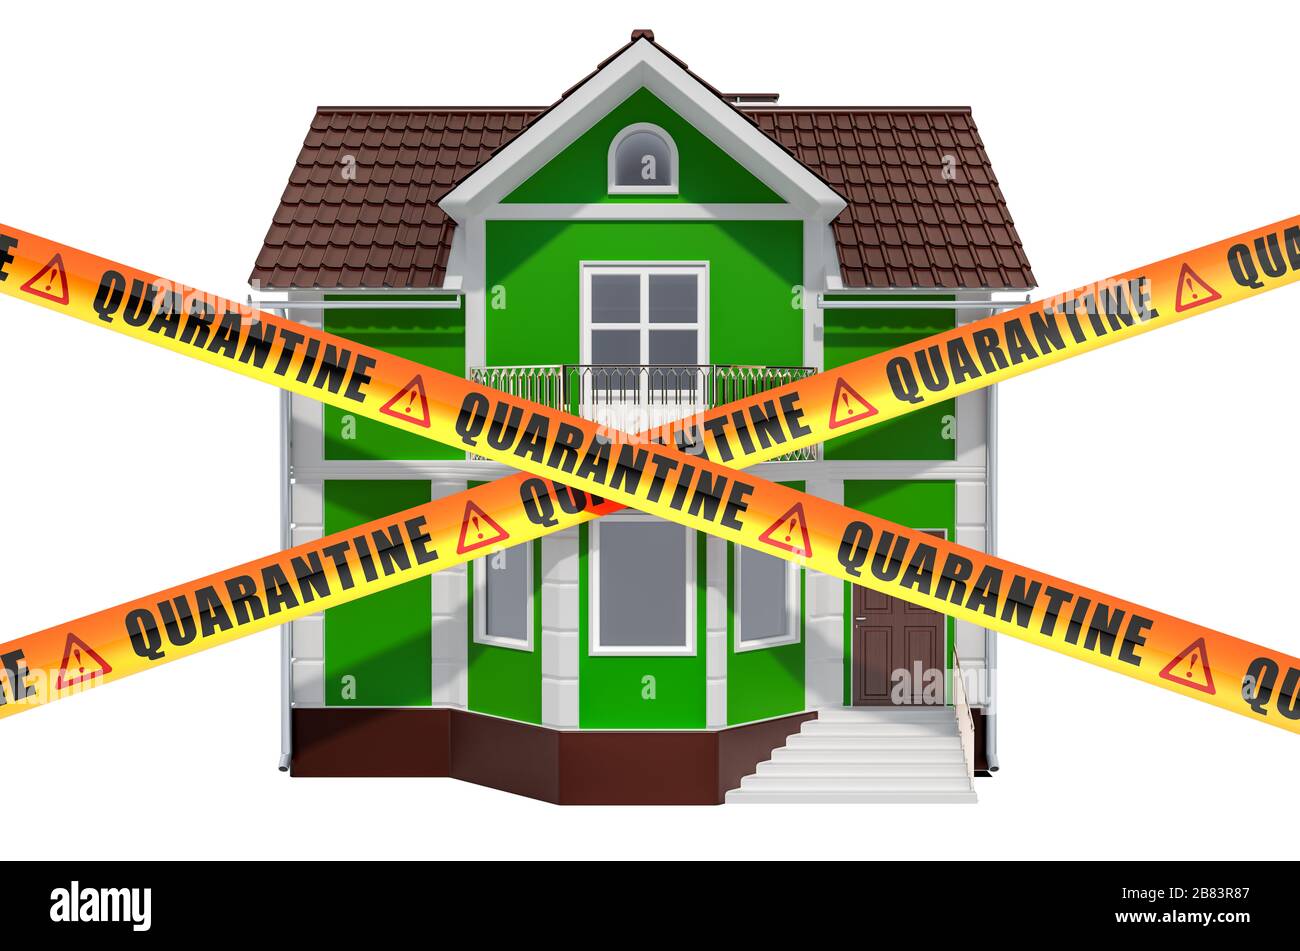 Home quarantine. Stay home, save lives concept. 3D rendering isolated on white background Stock Photo